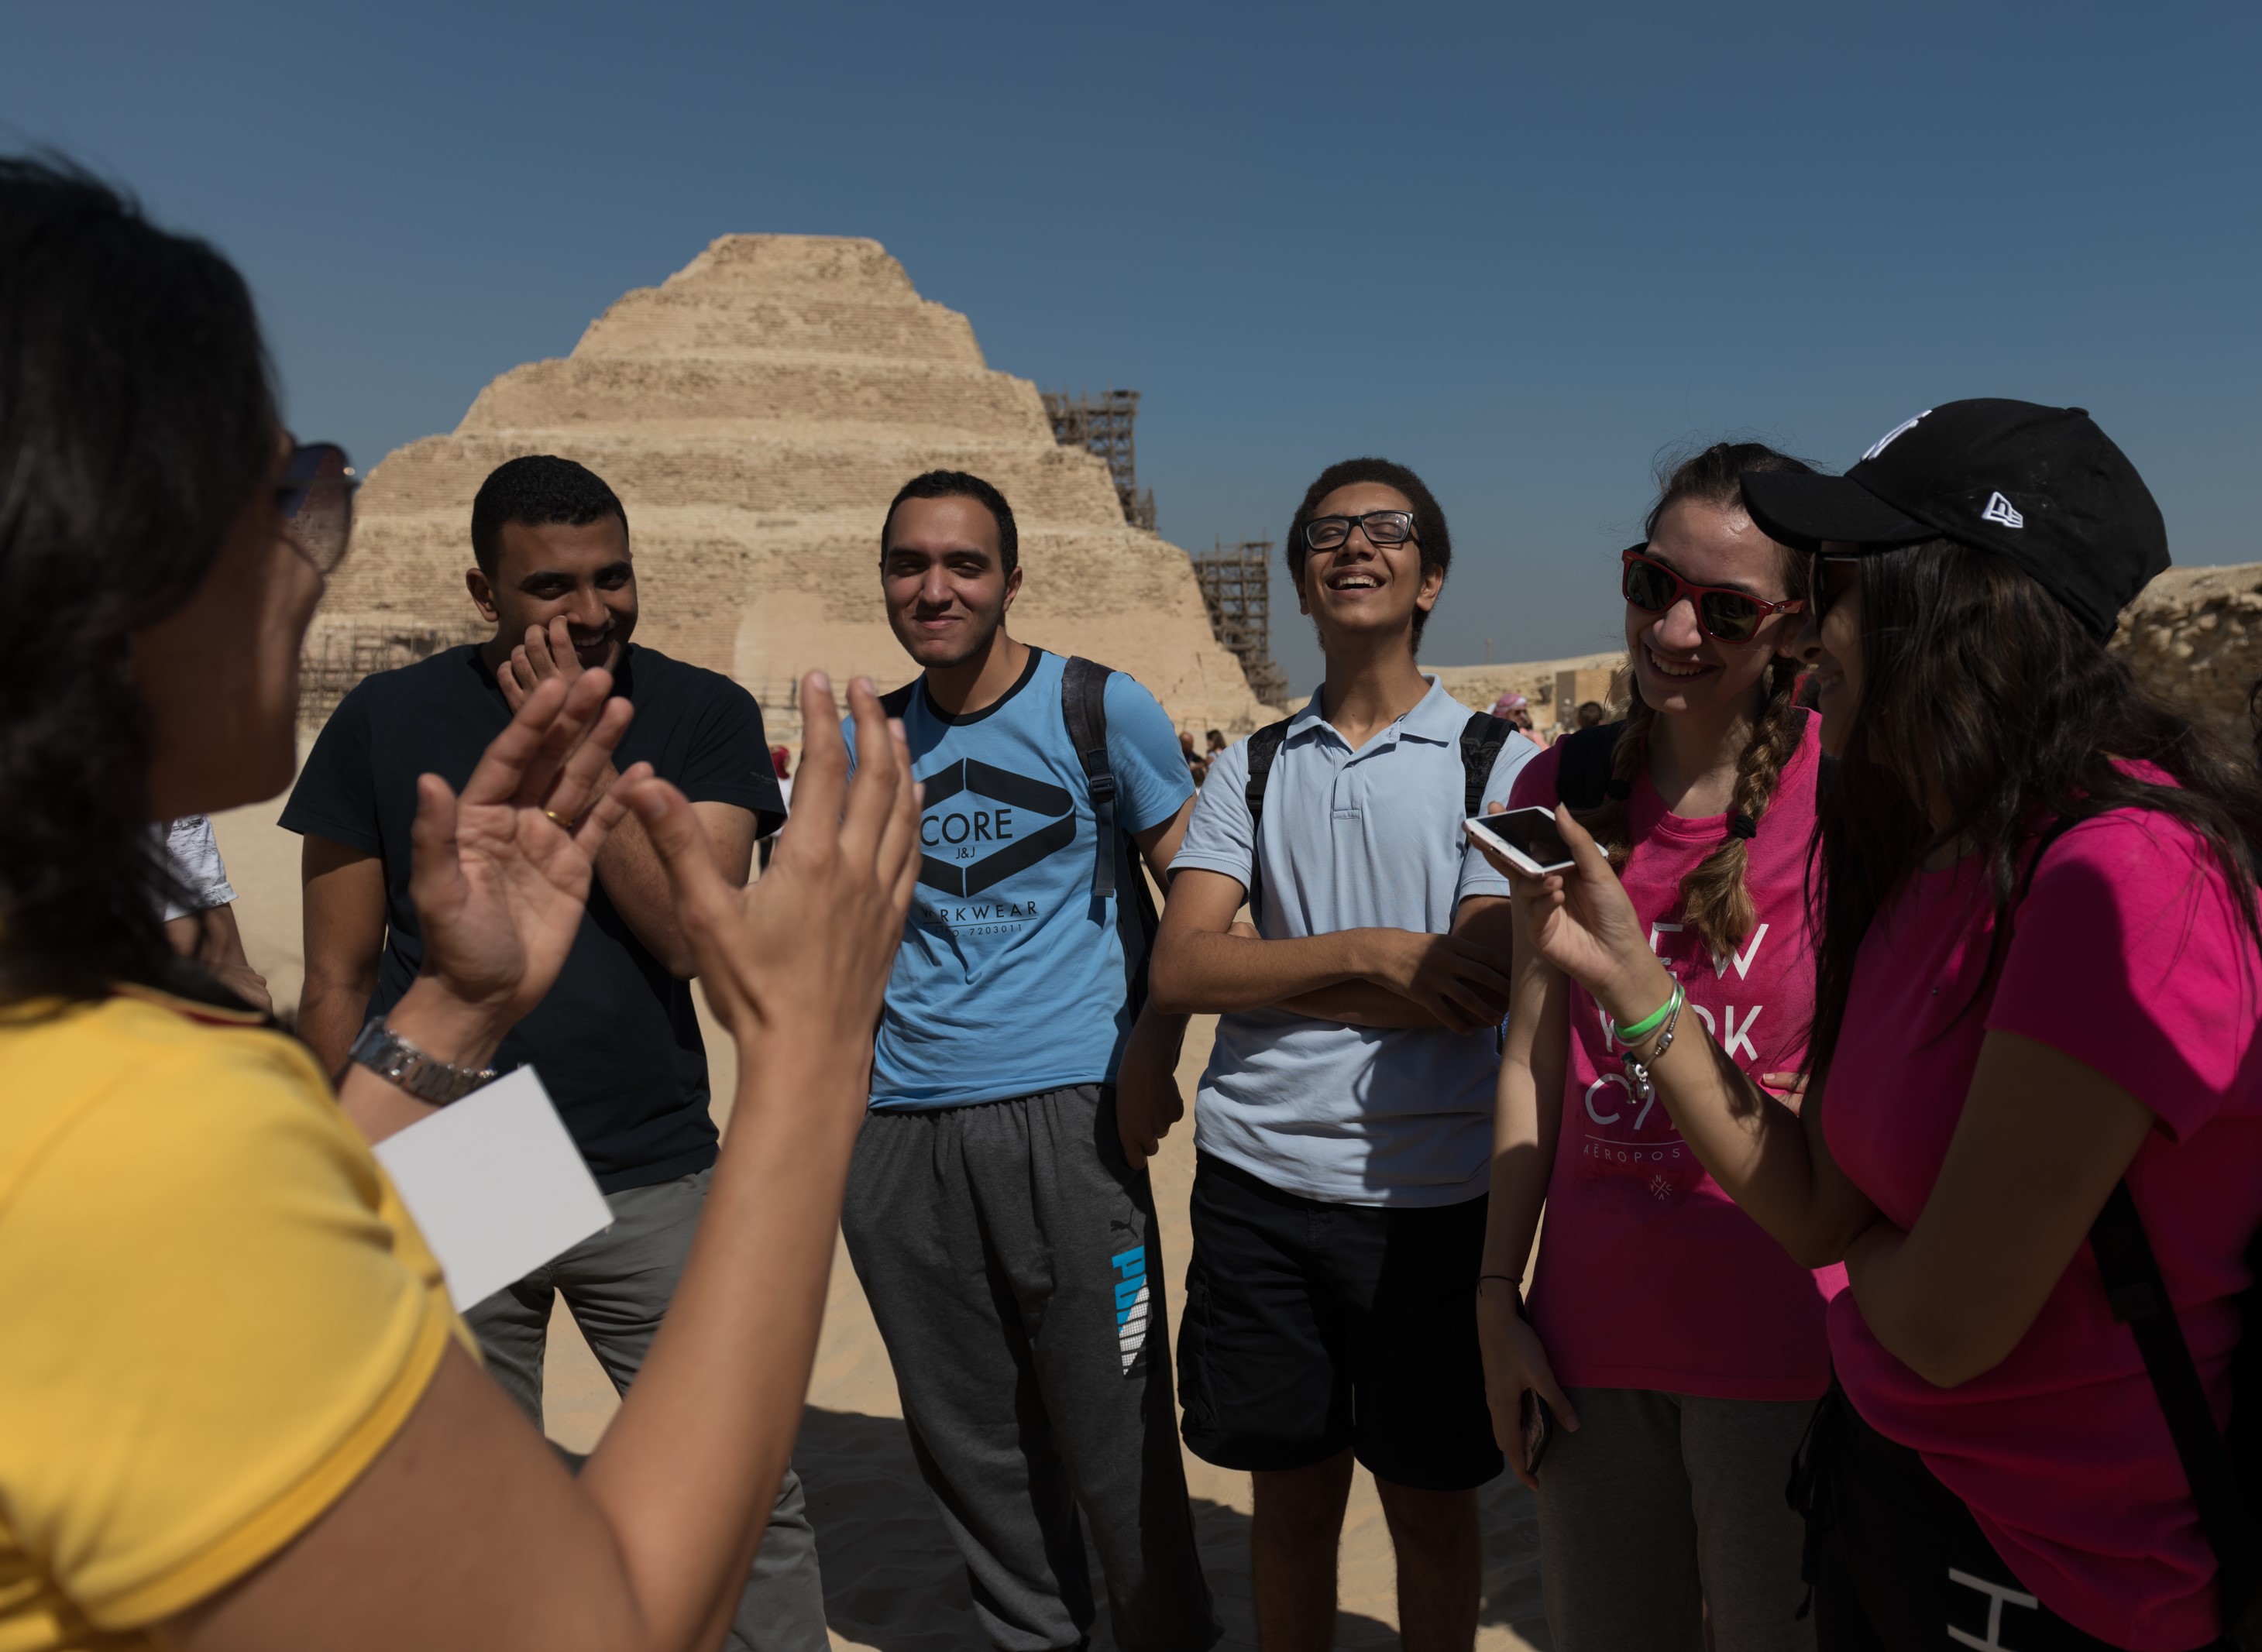 The students during their visit to Saqqara